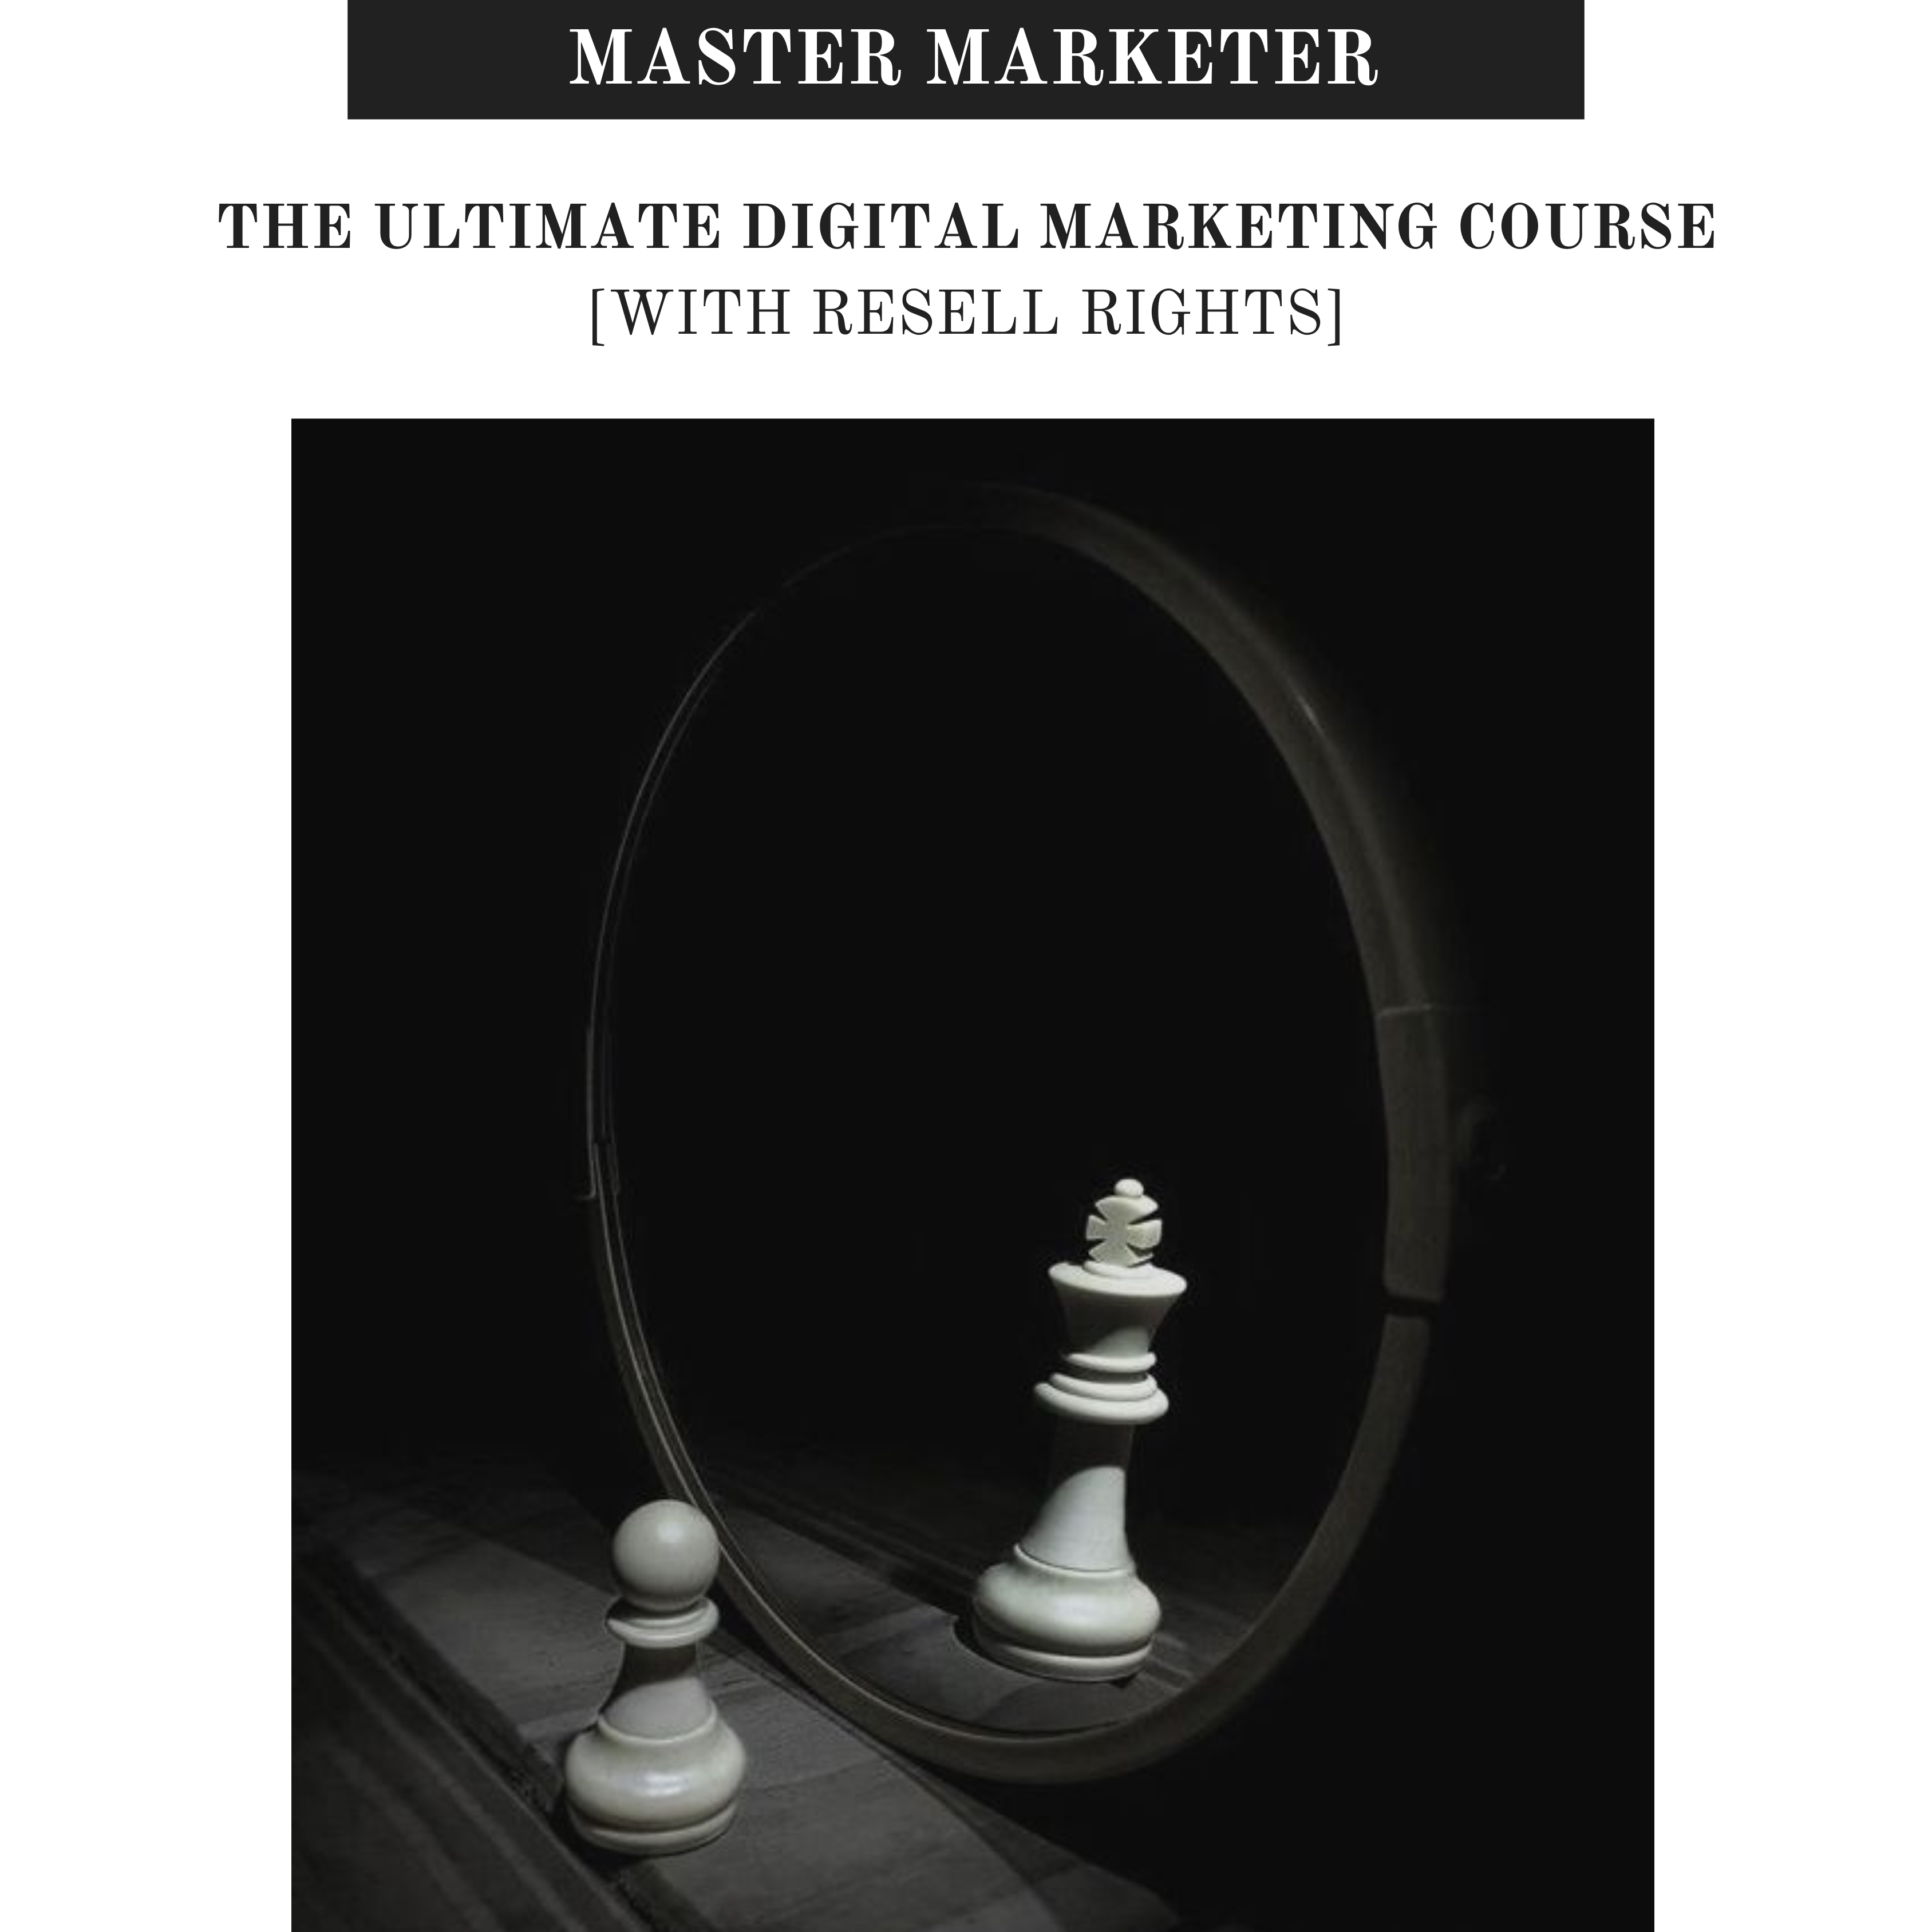 Master Marketer: The Ultimate Digital Marketing Course [With Resell Rights]